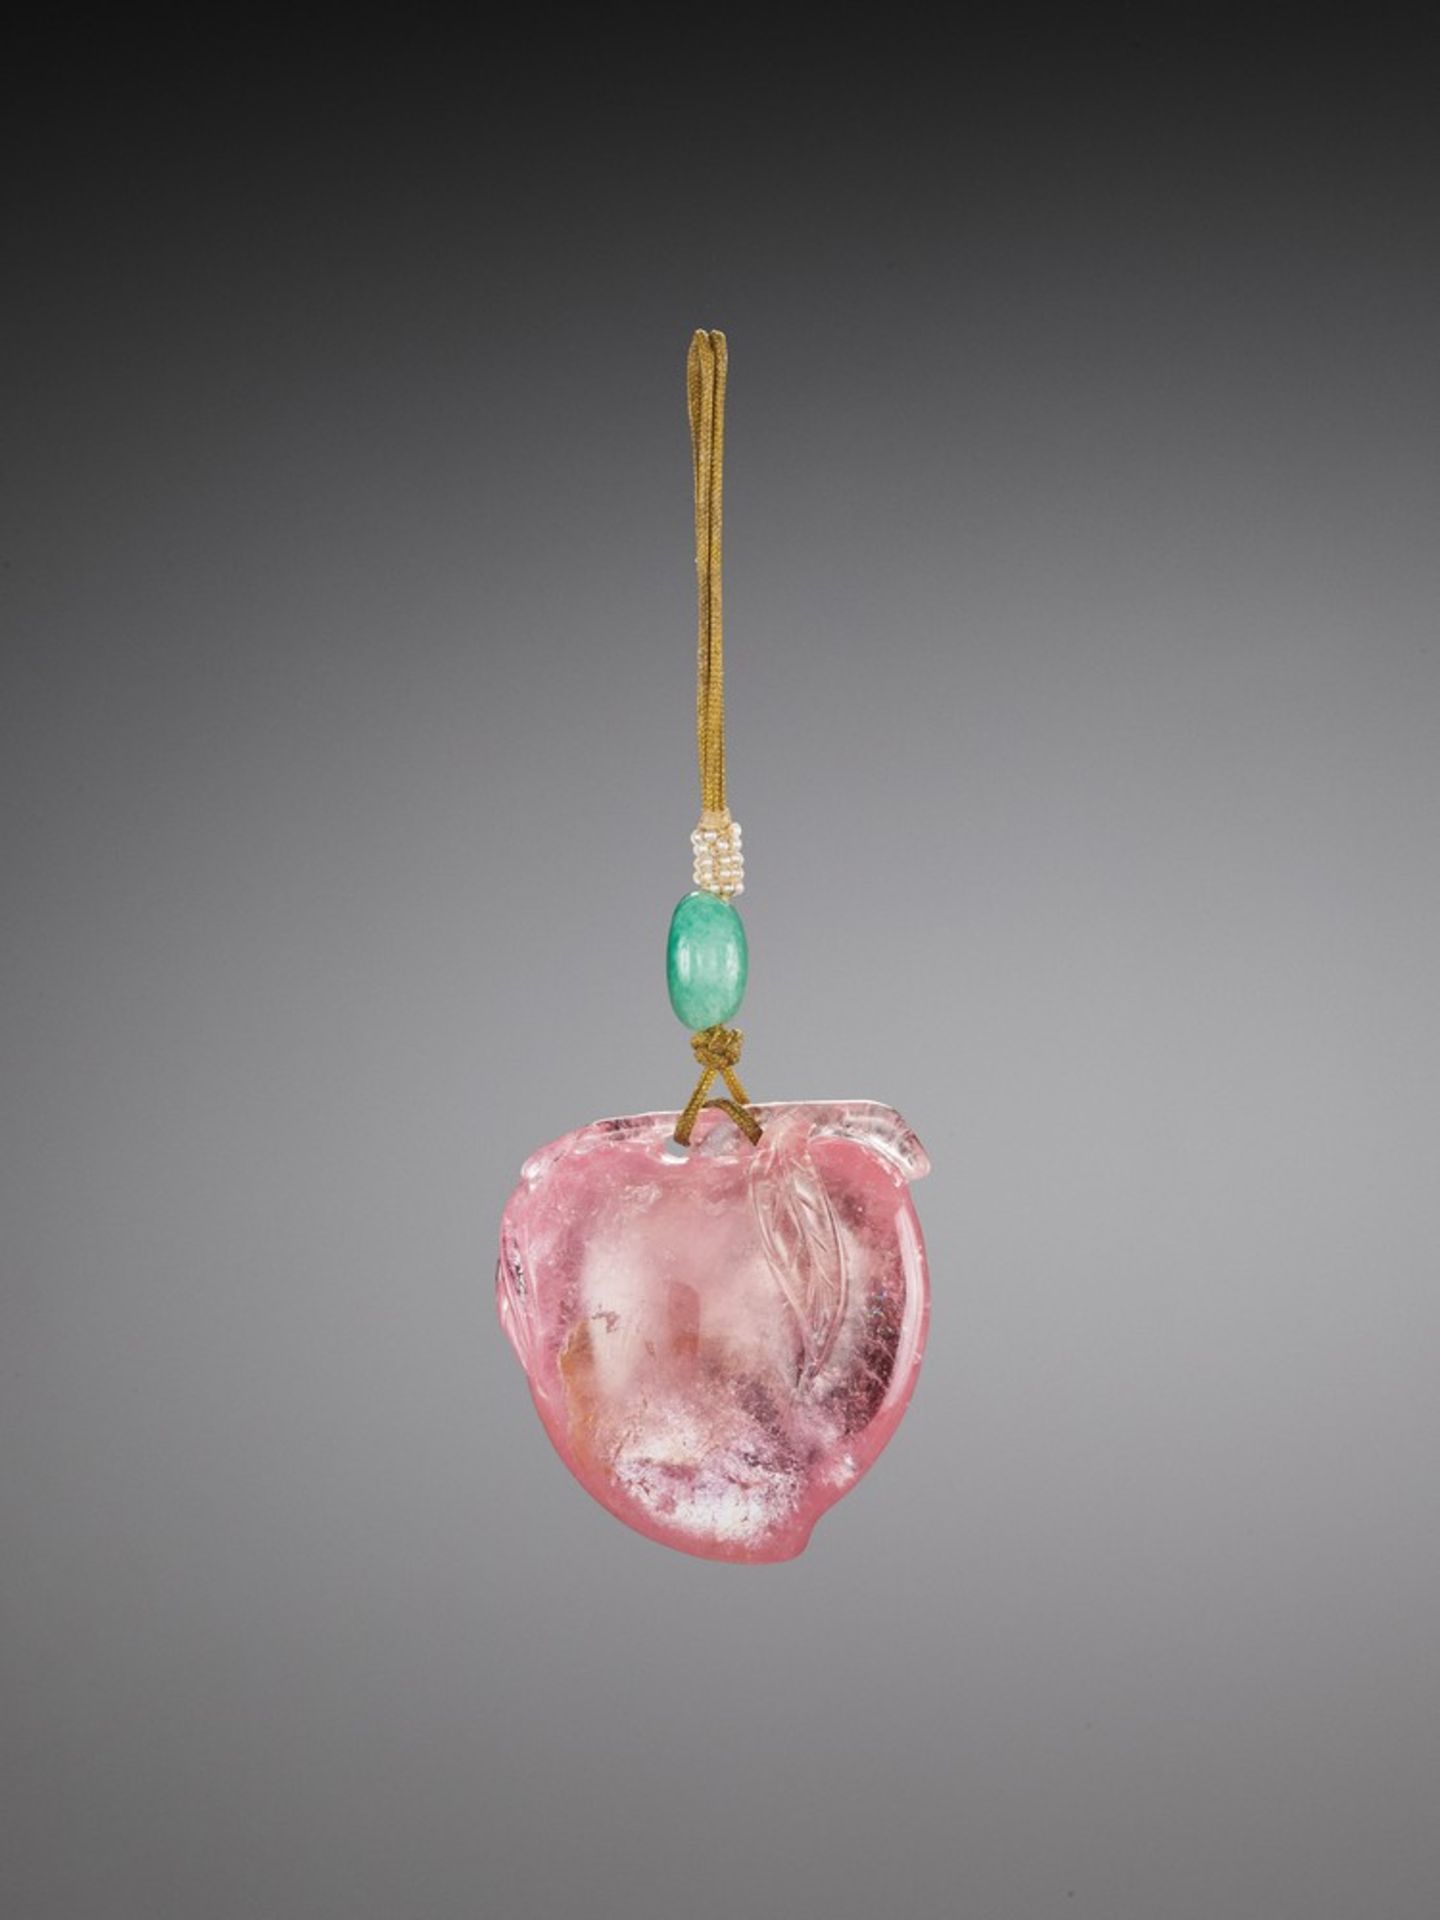 A CARVED PINK TOURMALINE 'PEACH' PENDANT, QING DYNASTY